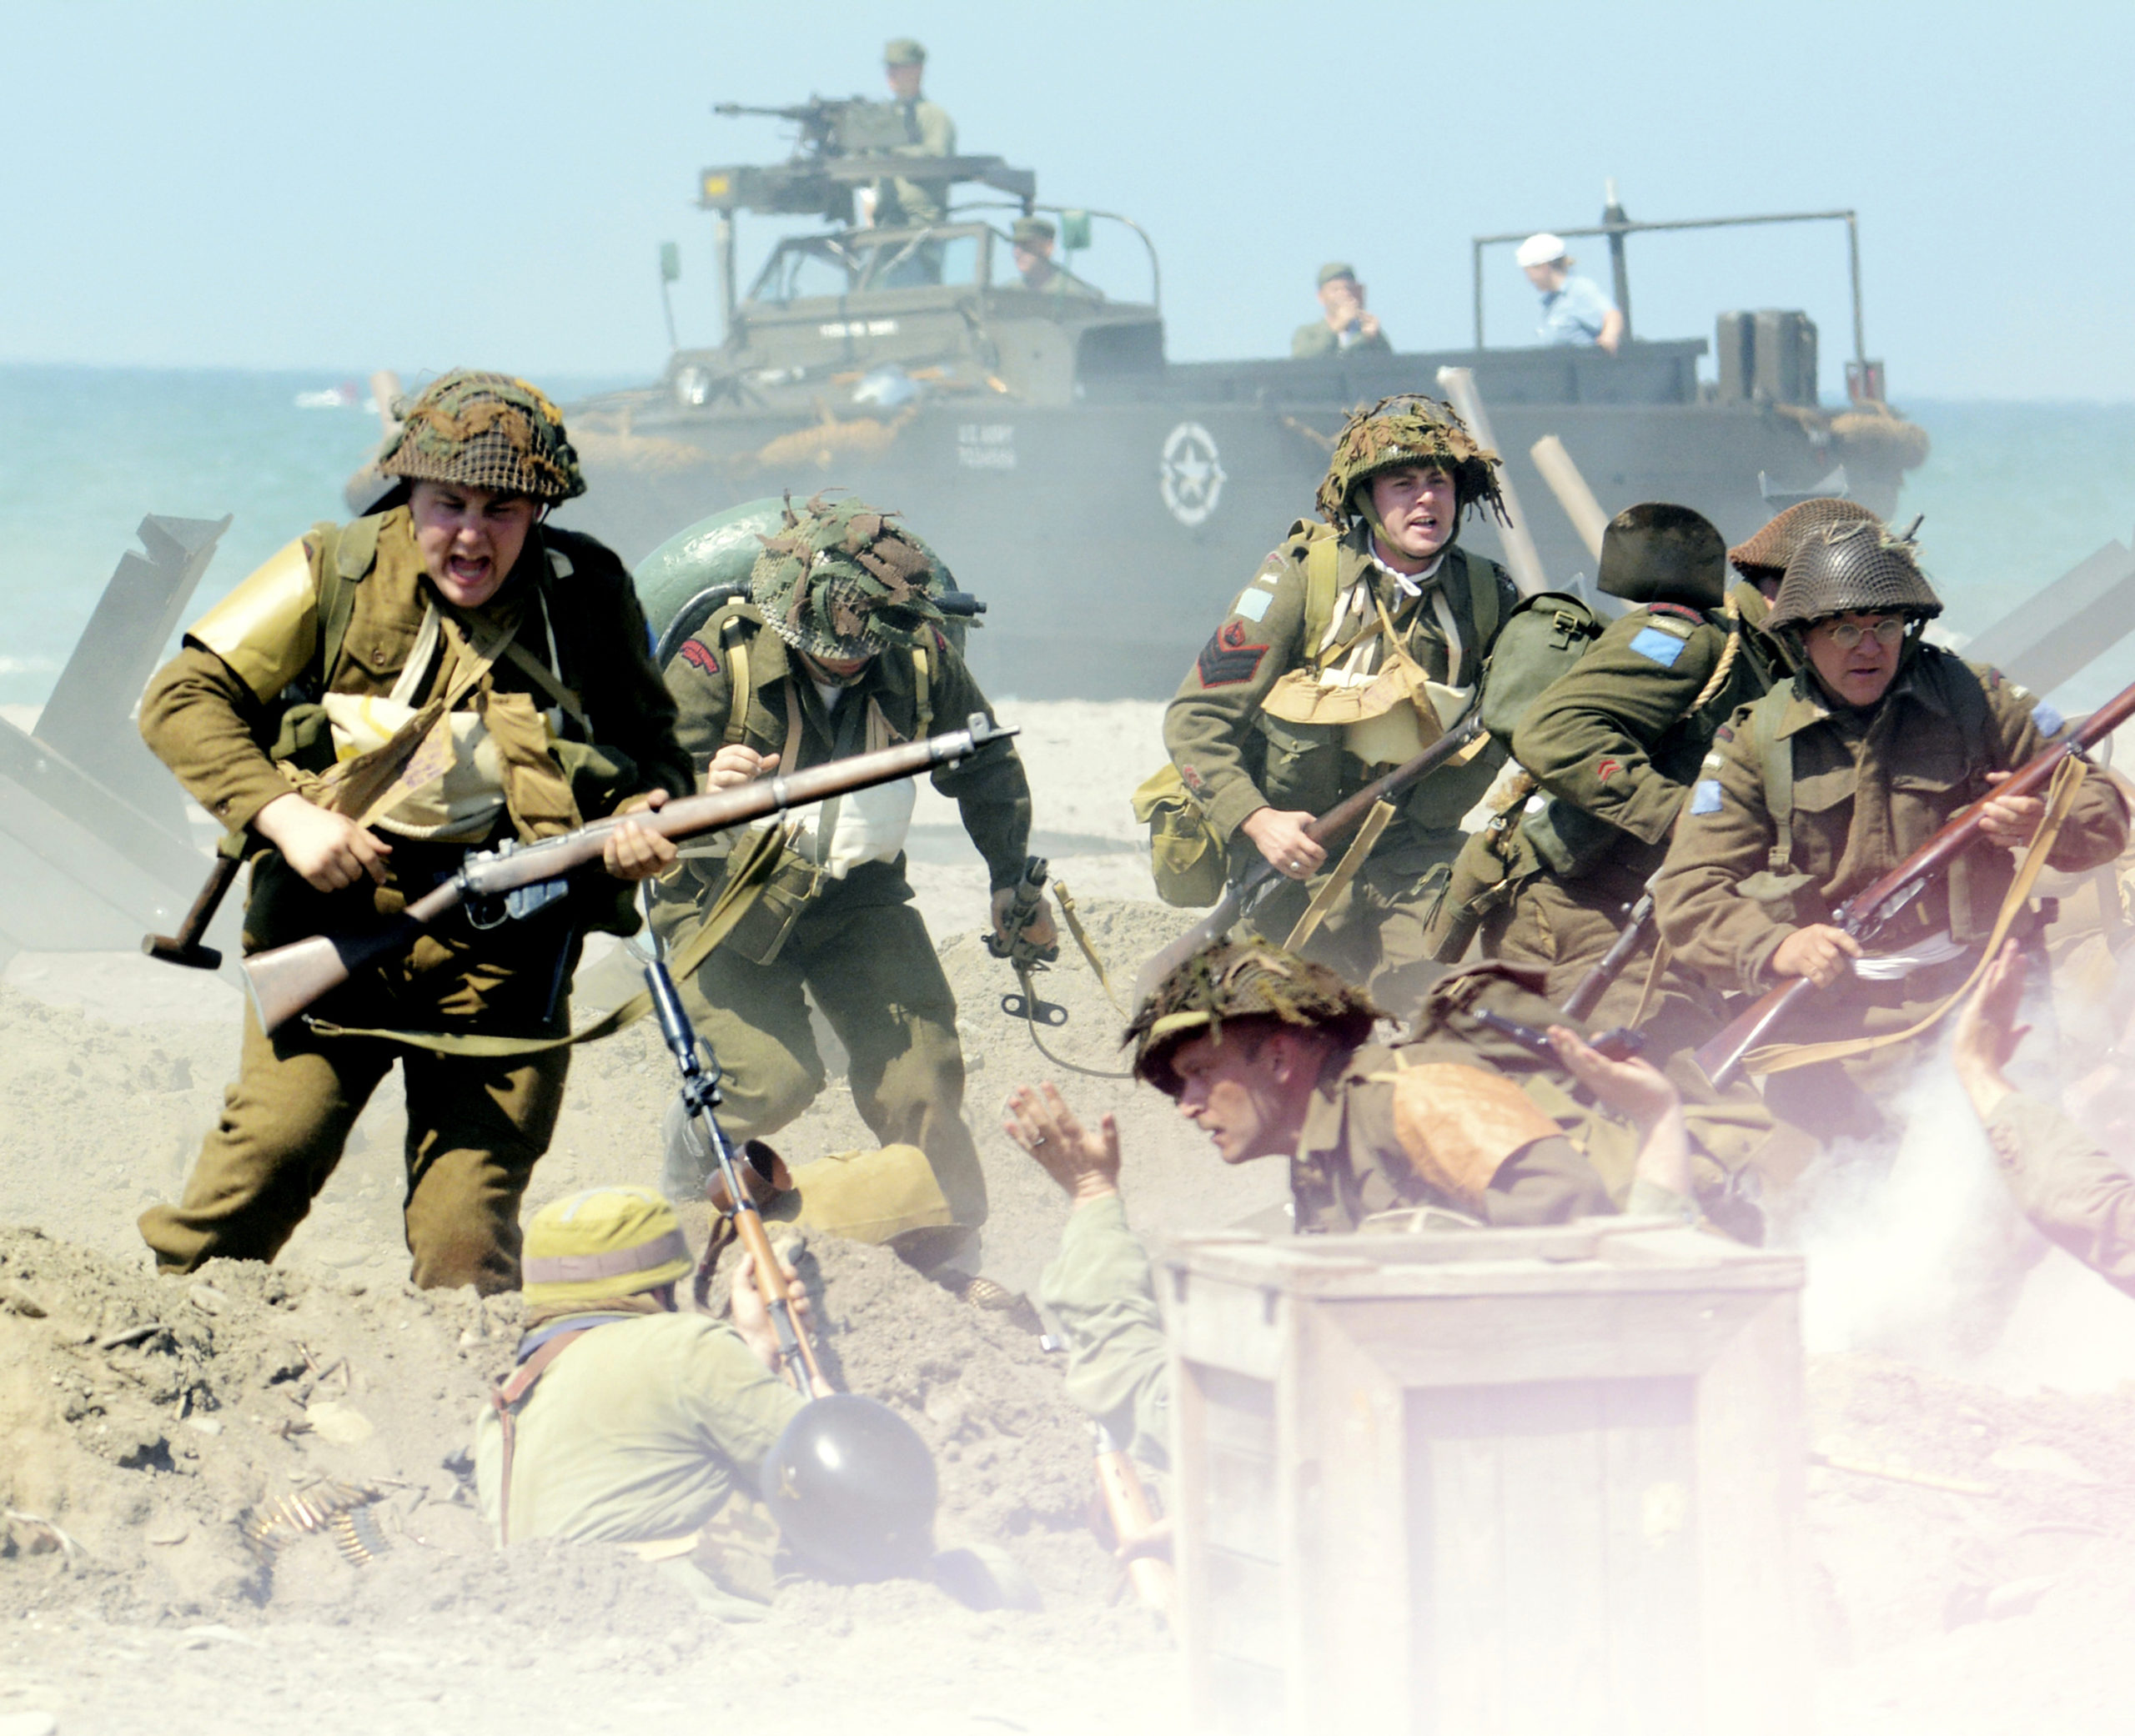 The World’s Largest D-Day Reenactment Is Happening This Week — in Ohio